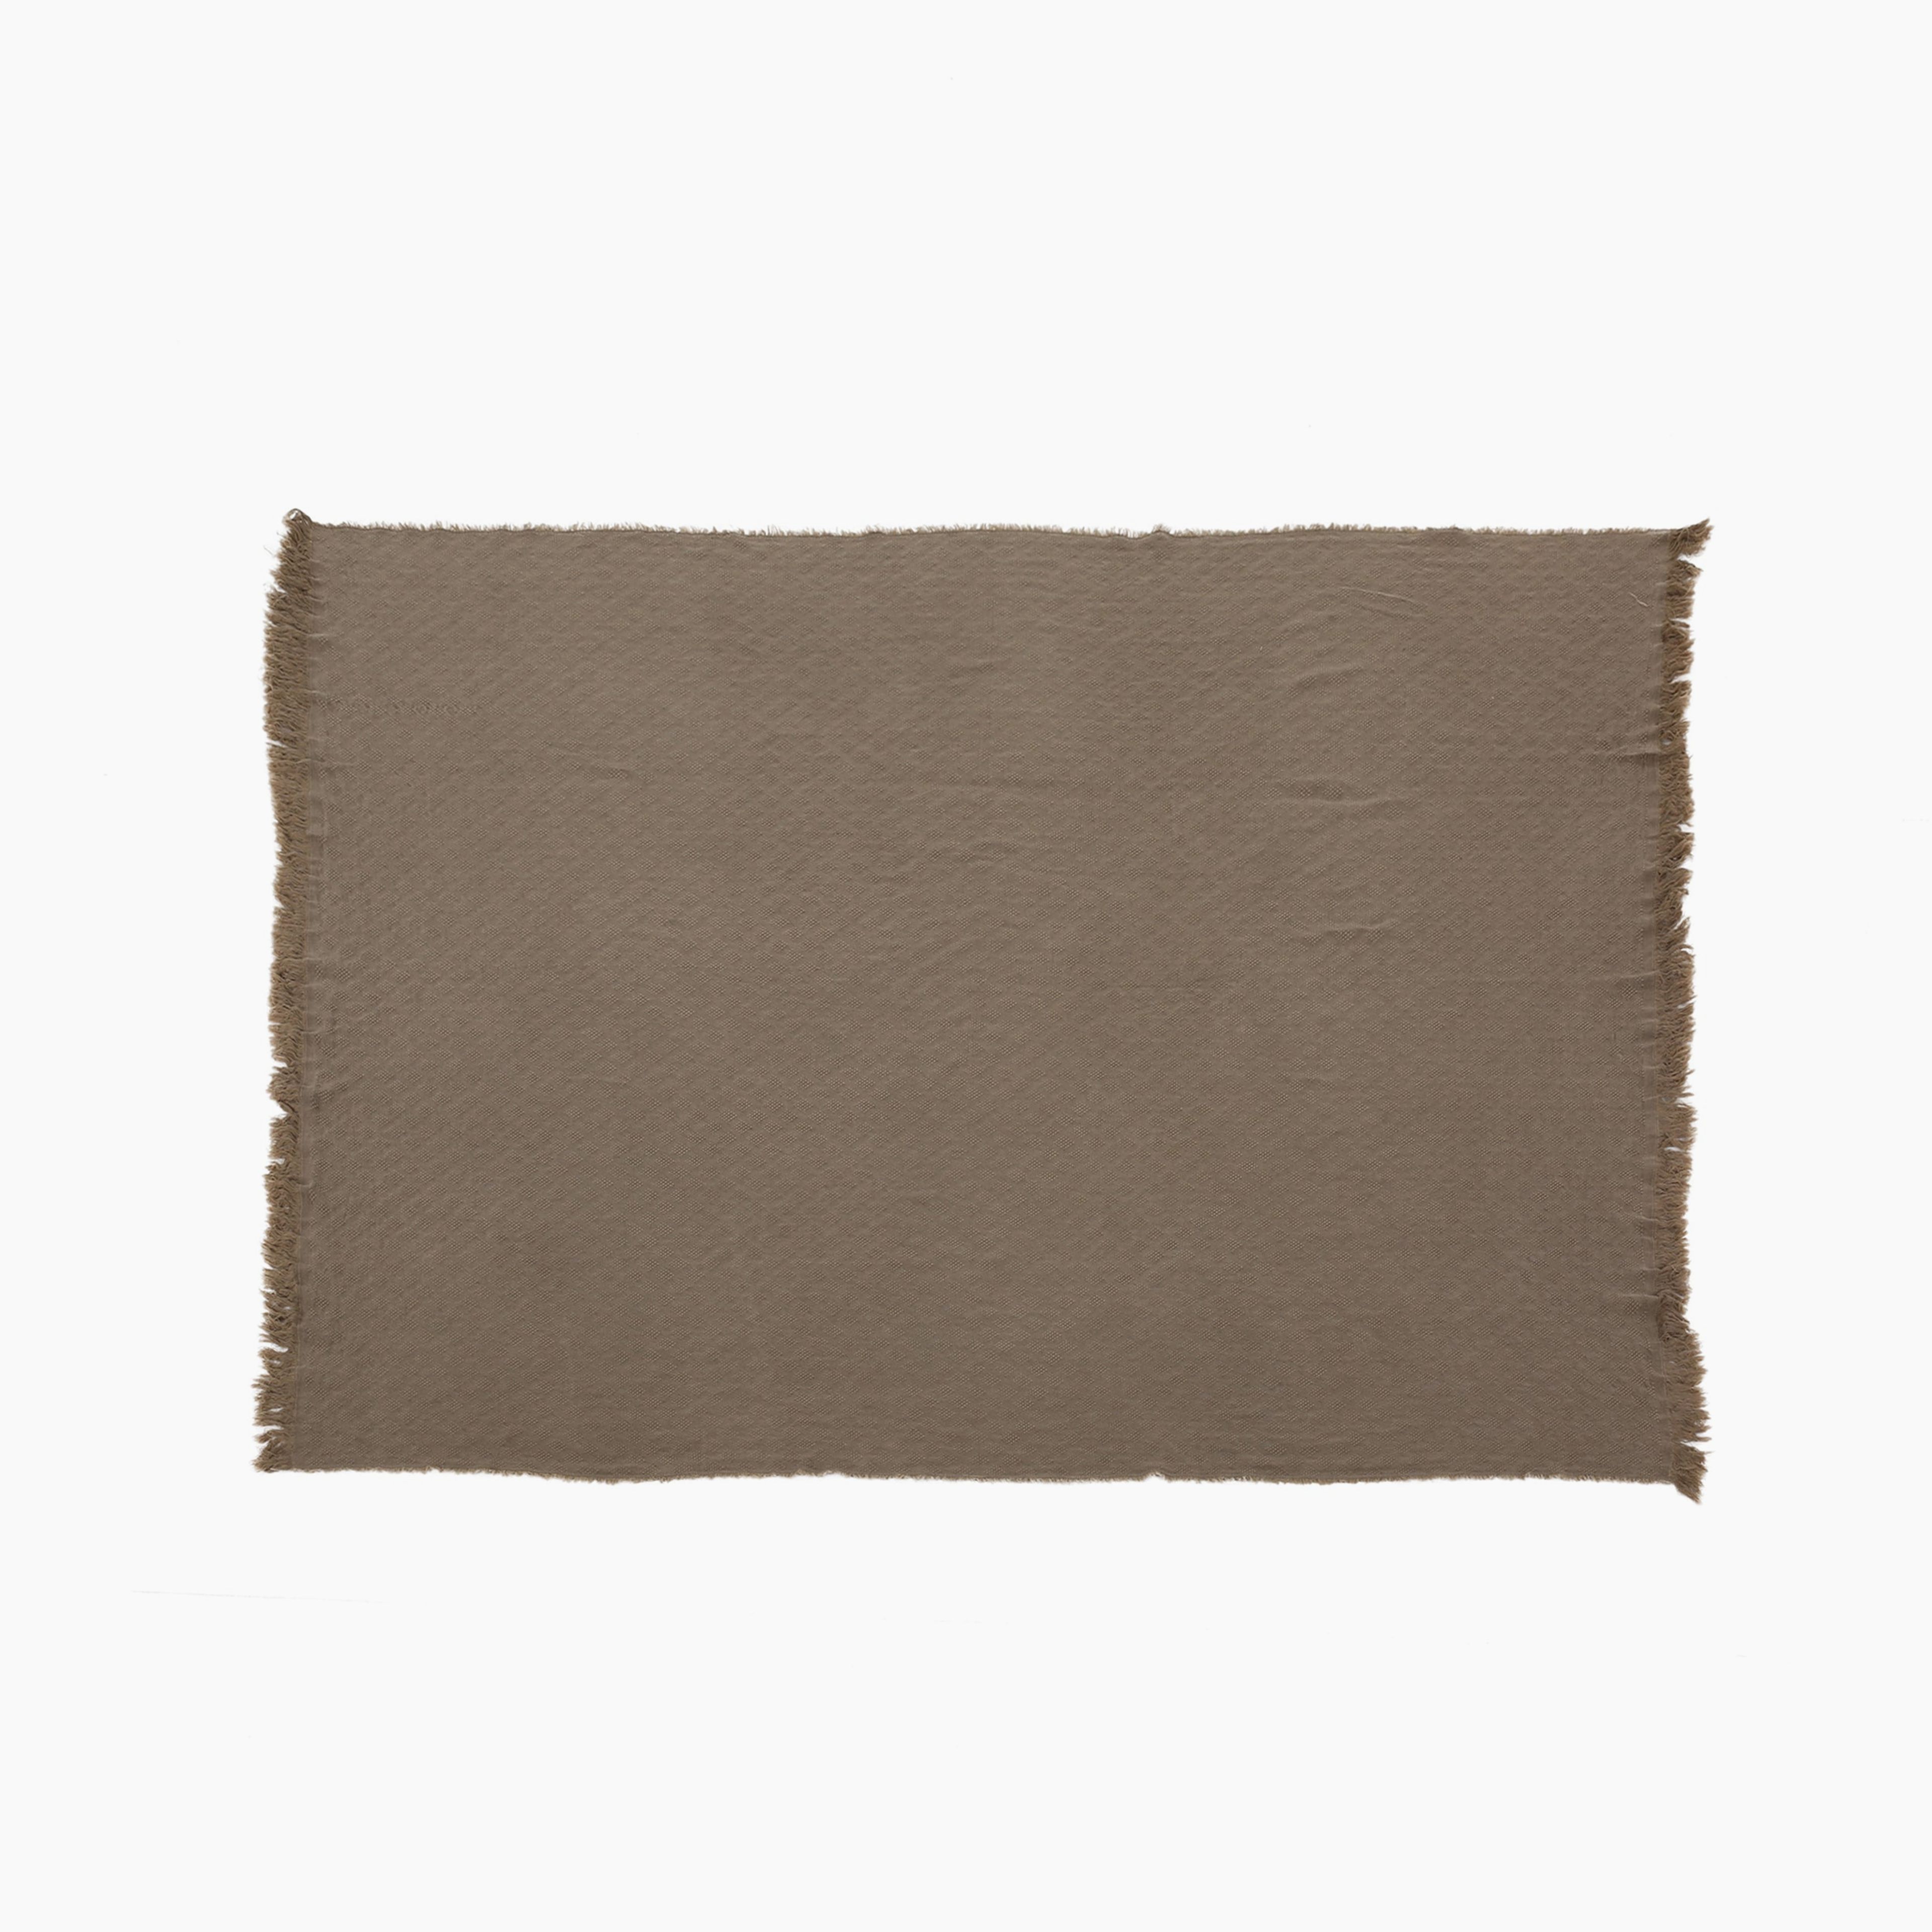 Kyra Contemporary Cotton Throw Blanket with Fringes, Brown